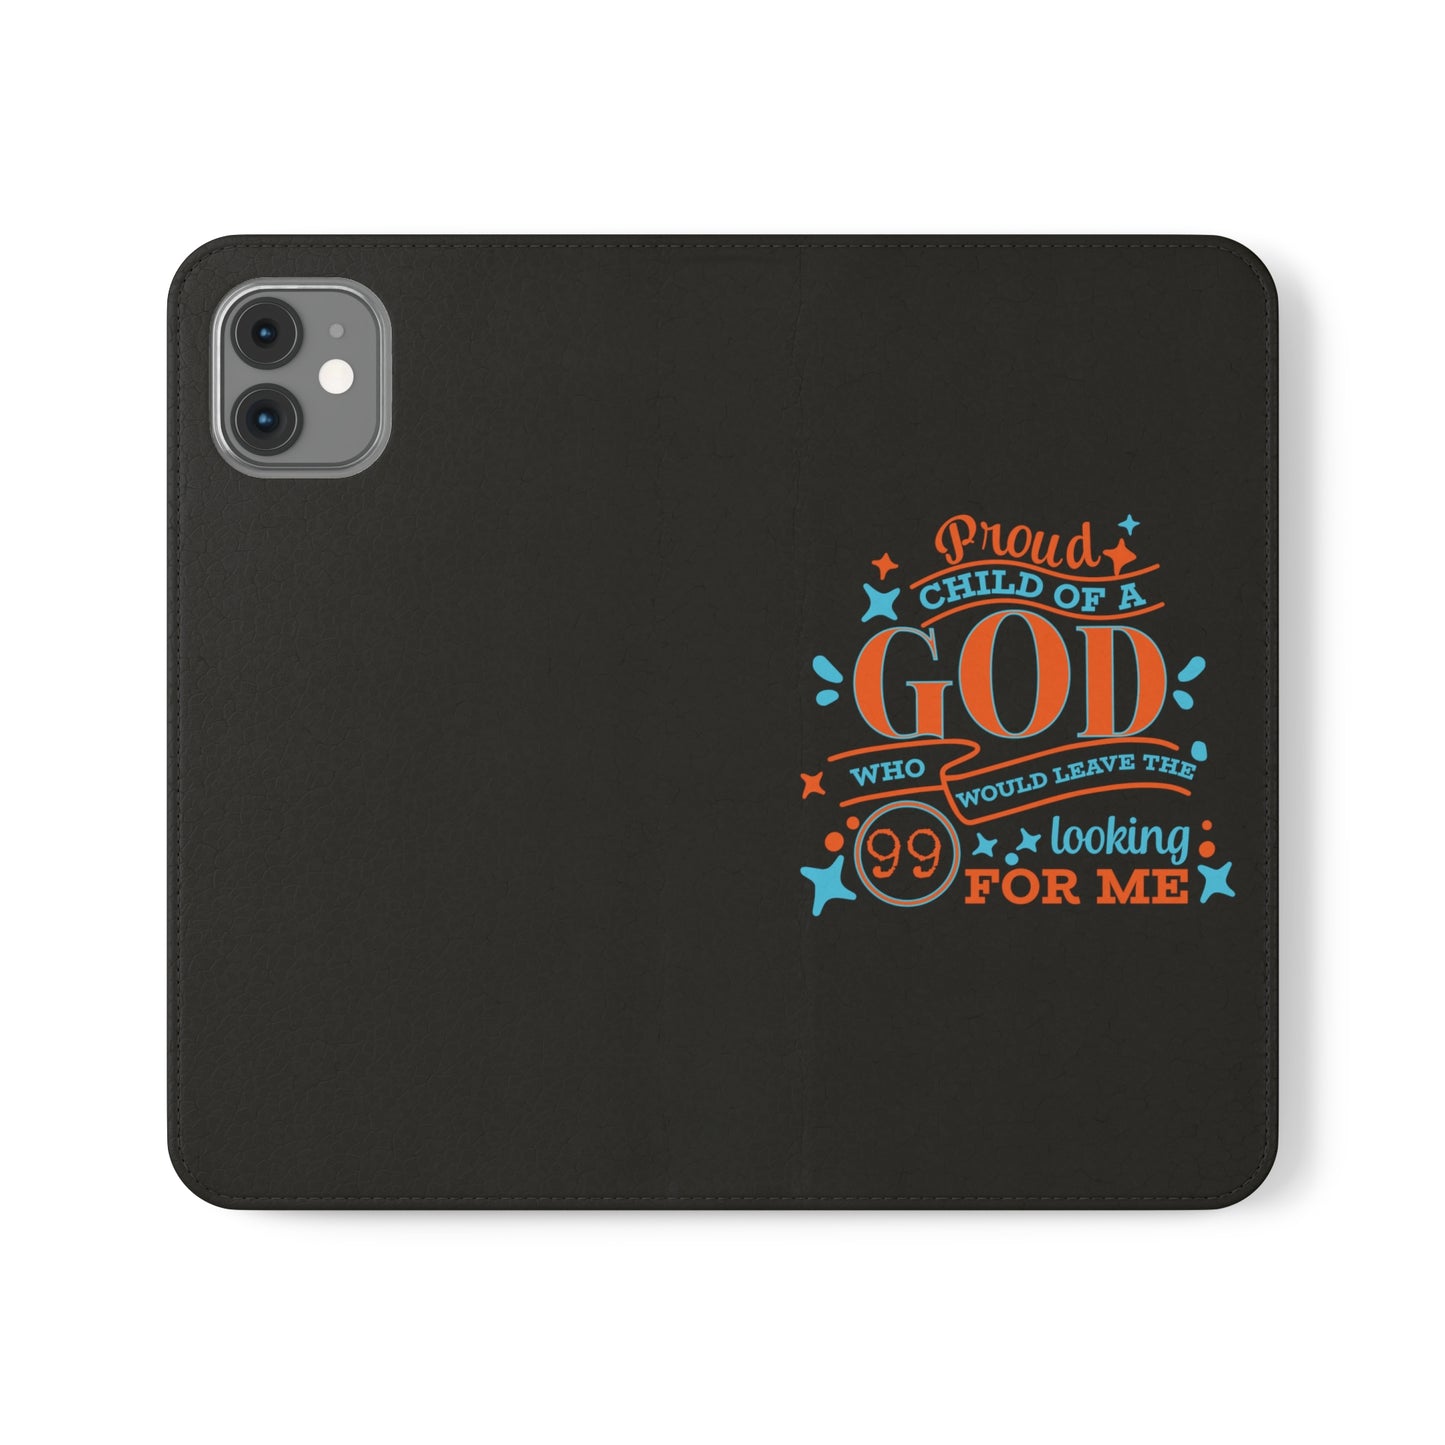 Prould Child Of A God Who Would Leave The 99 Looking For Me Phone Flip Cases